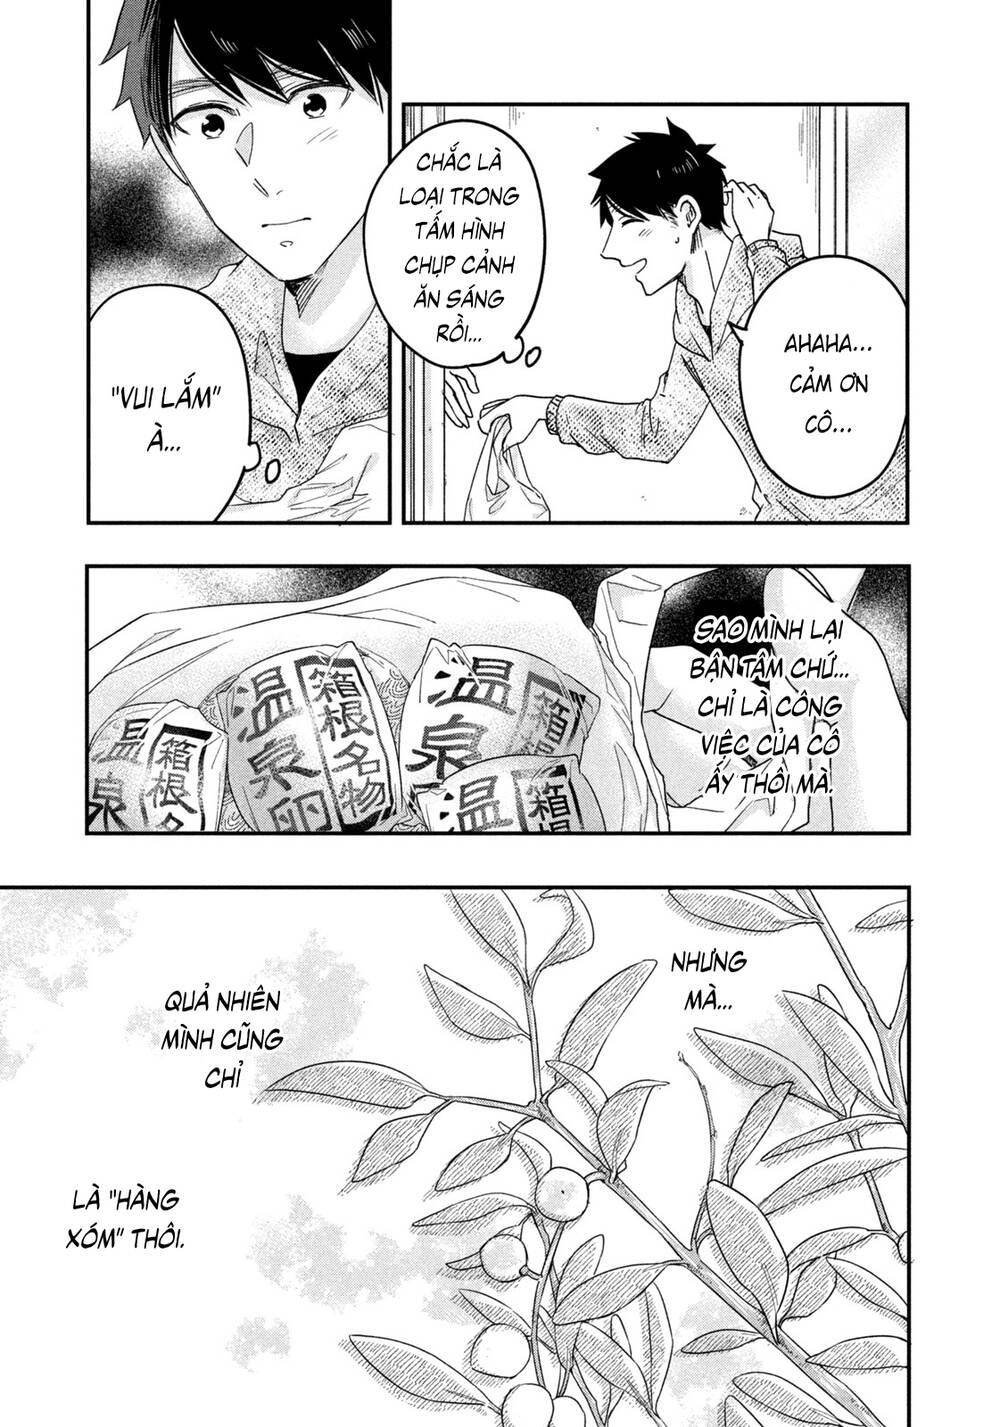 page_13